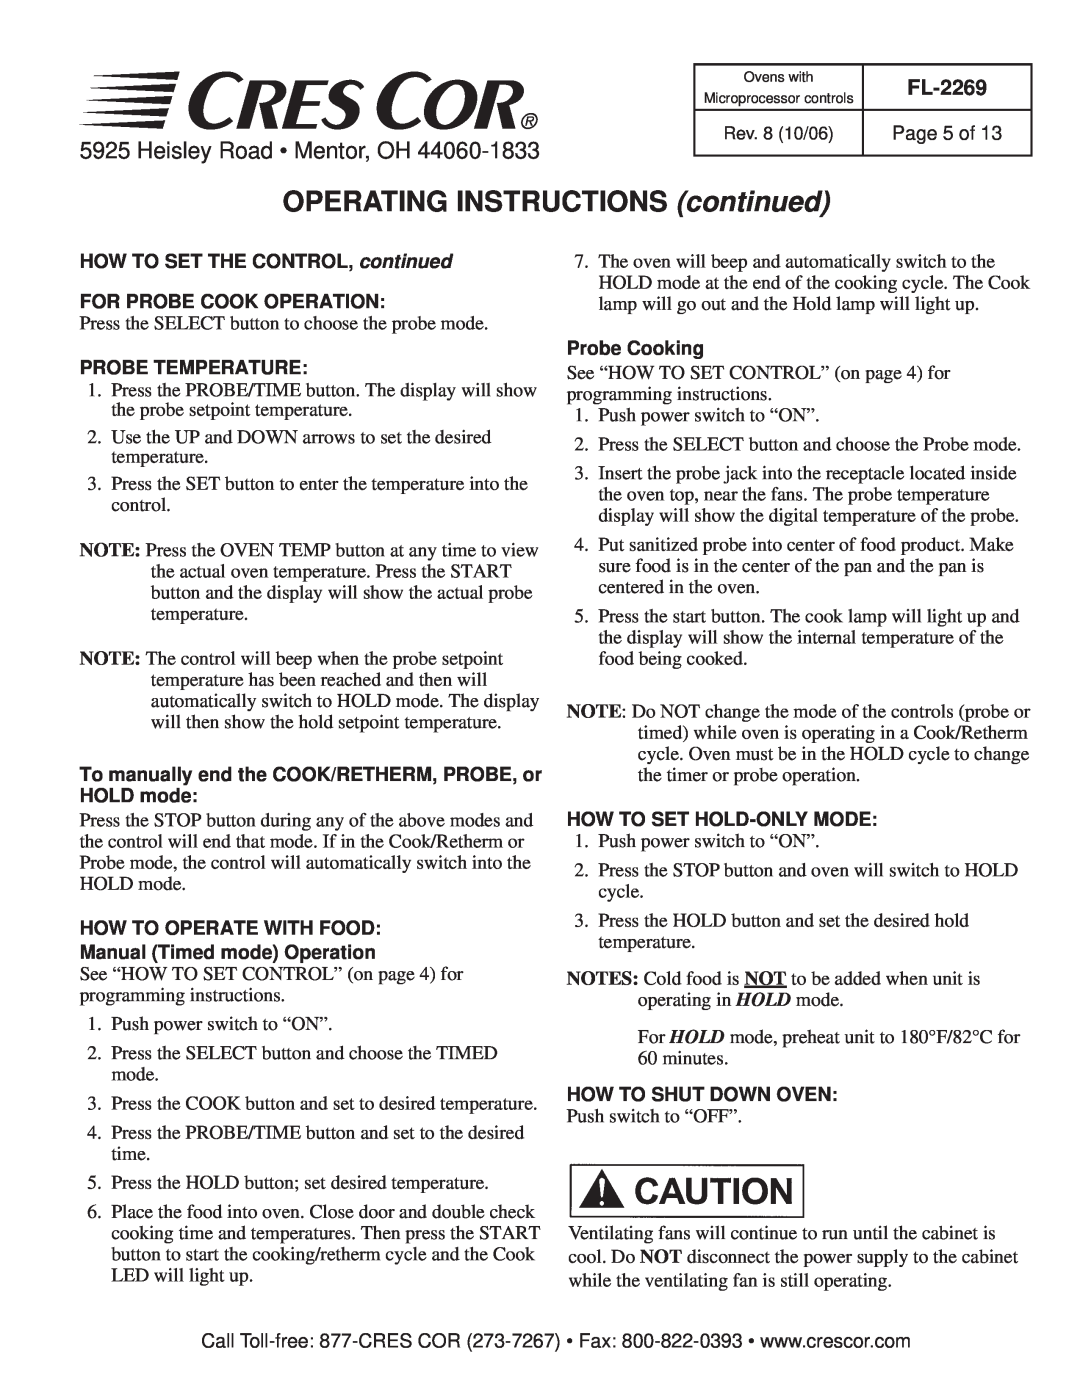 Cres Cor CO151H189B-Q1 OPERATING INSTRUCTIONS continued, Page 5 of, HOW TO SET THE CONTROL, continued, Probe Temperature 